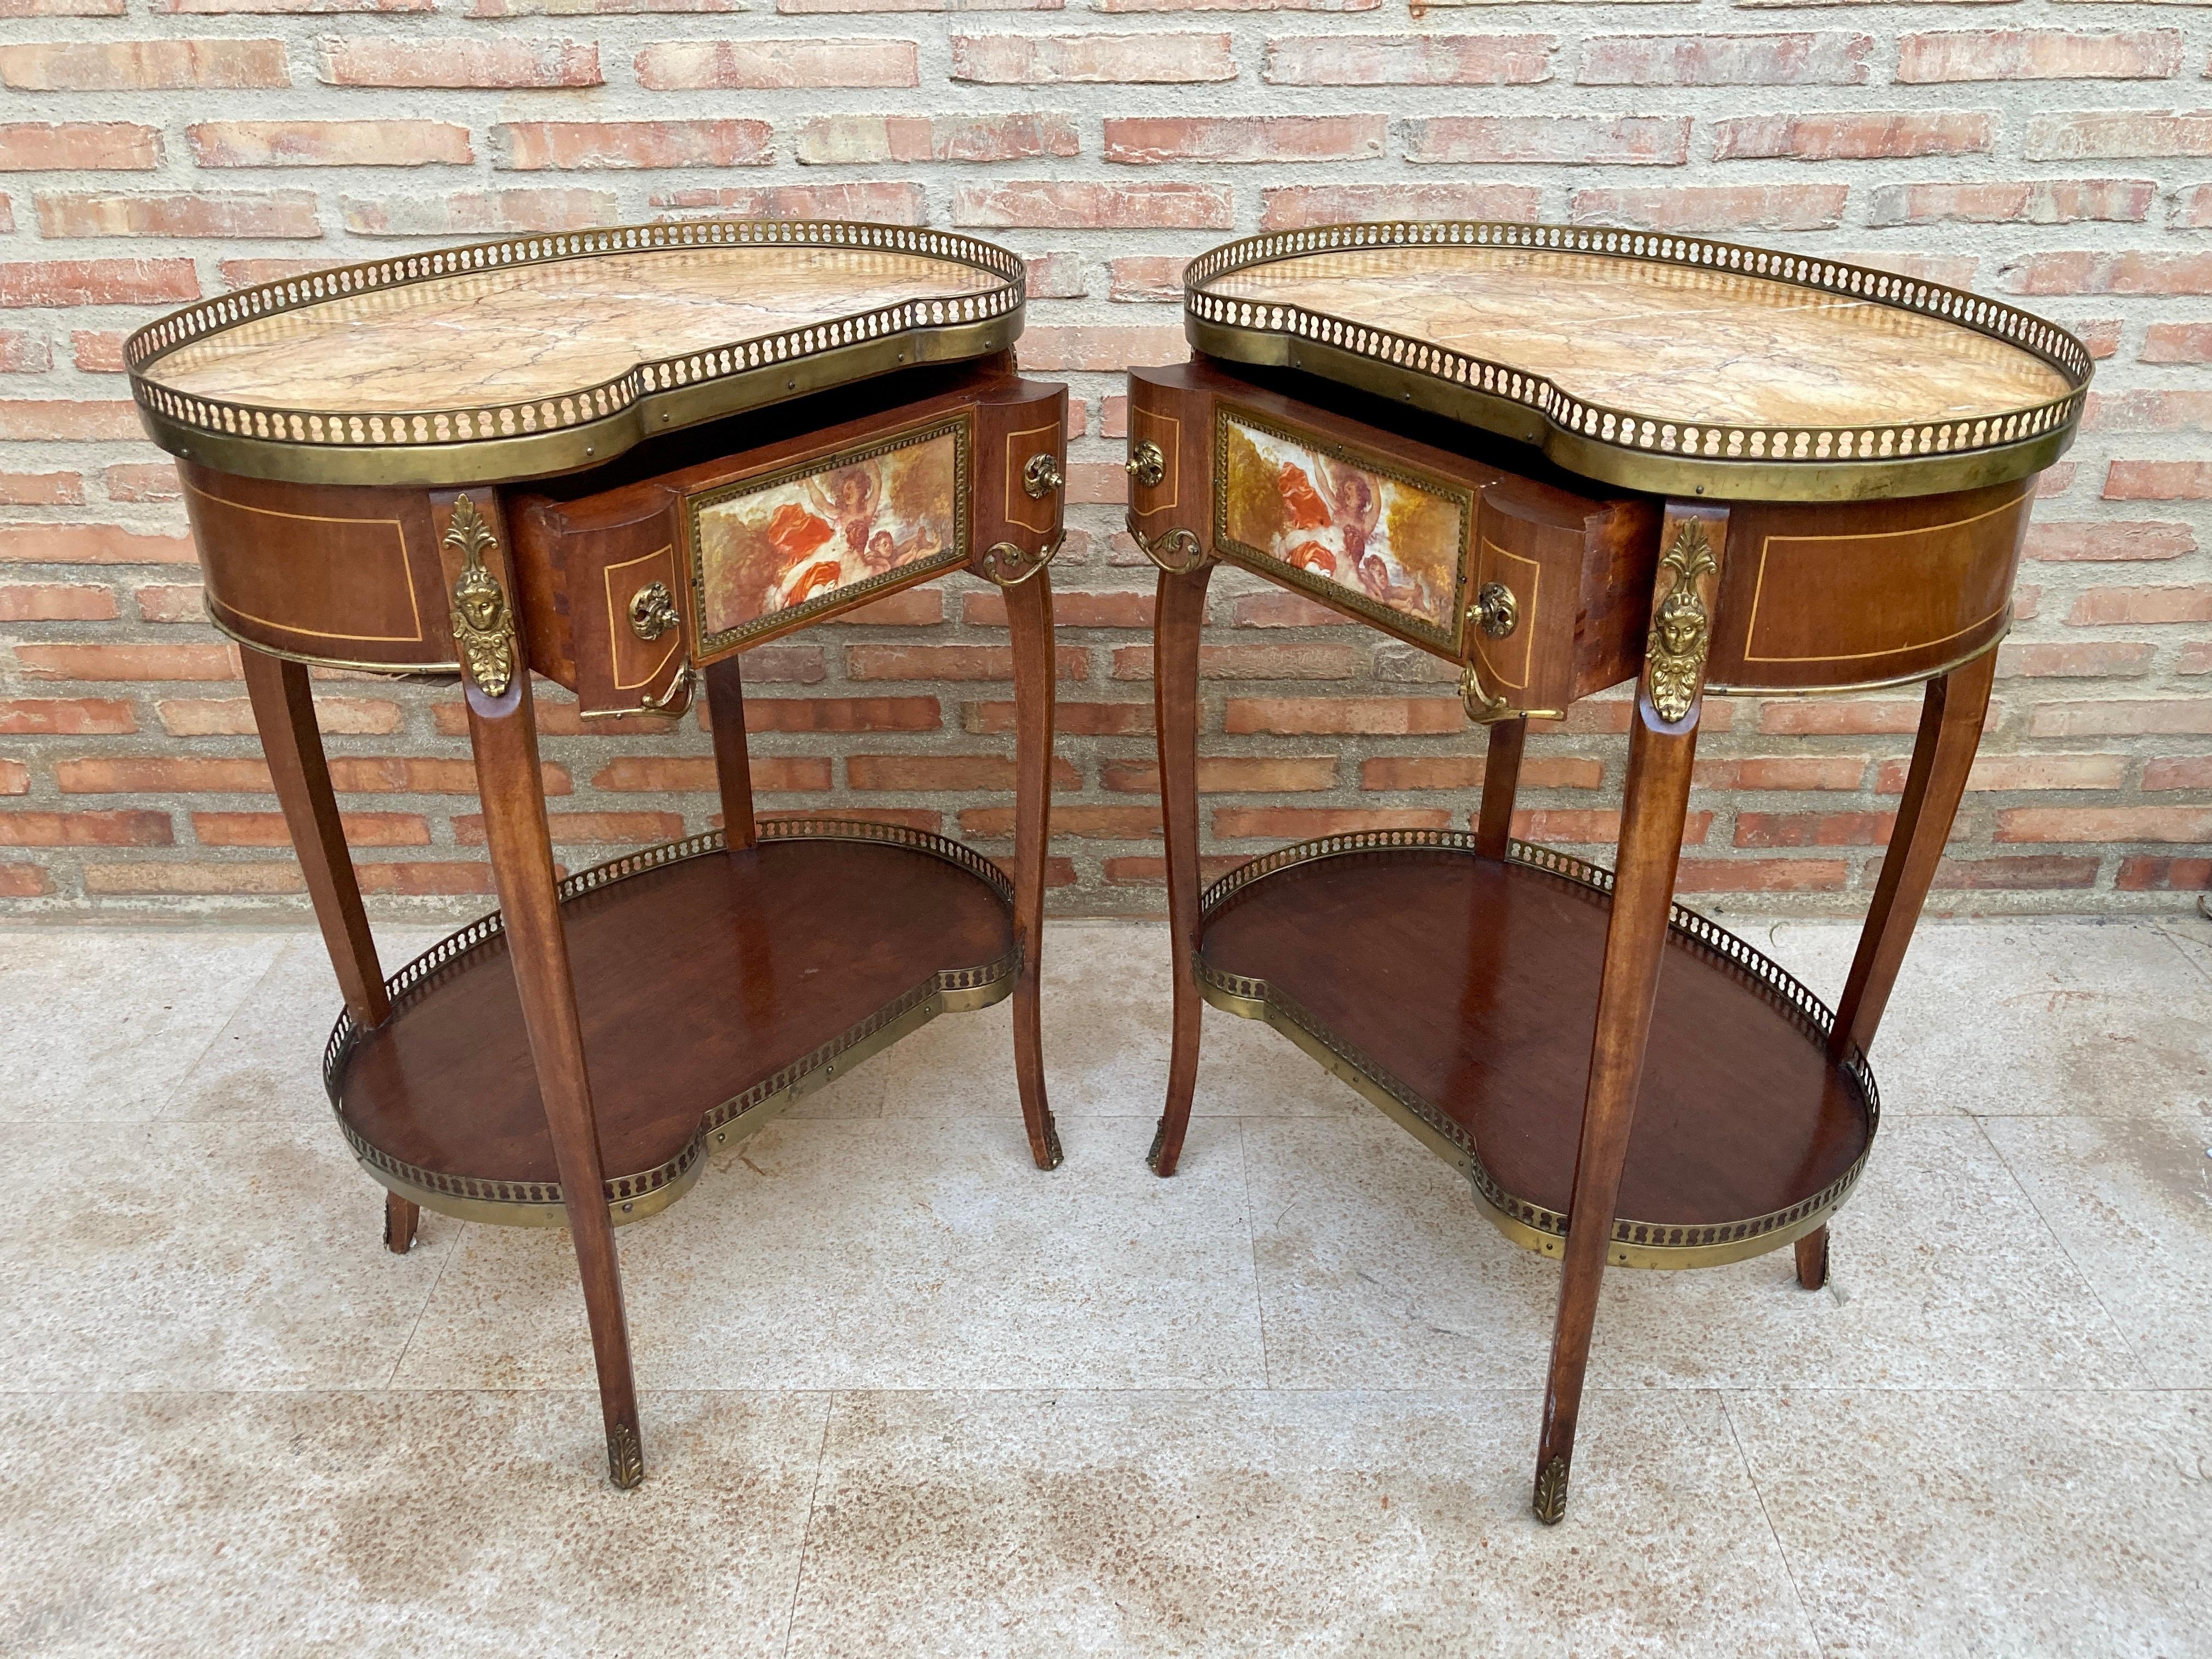 English Carved Wood Kidney Shaped Bedside Tables with Bronze and Marble Top, Set of 2 For Sale